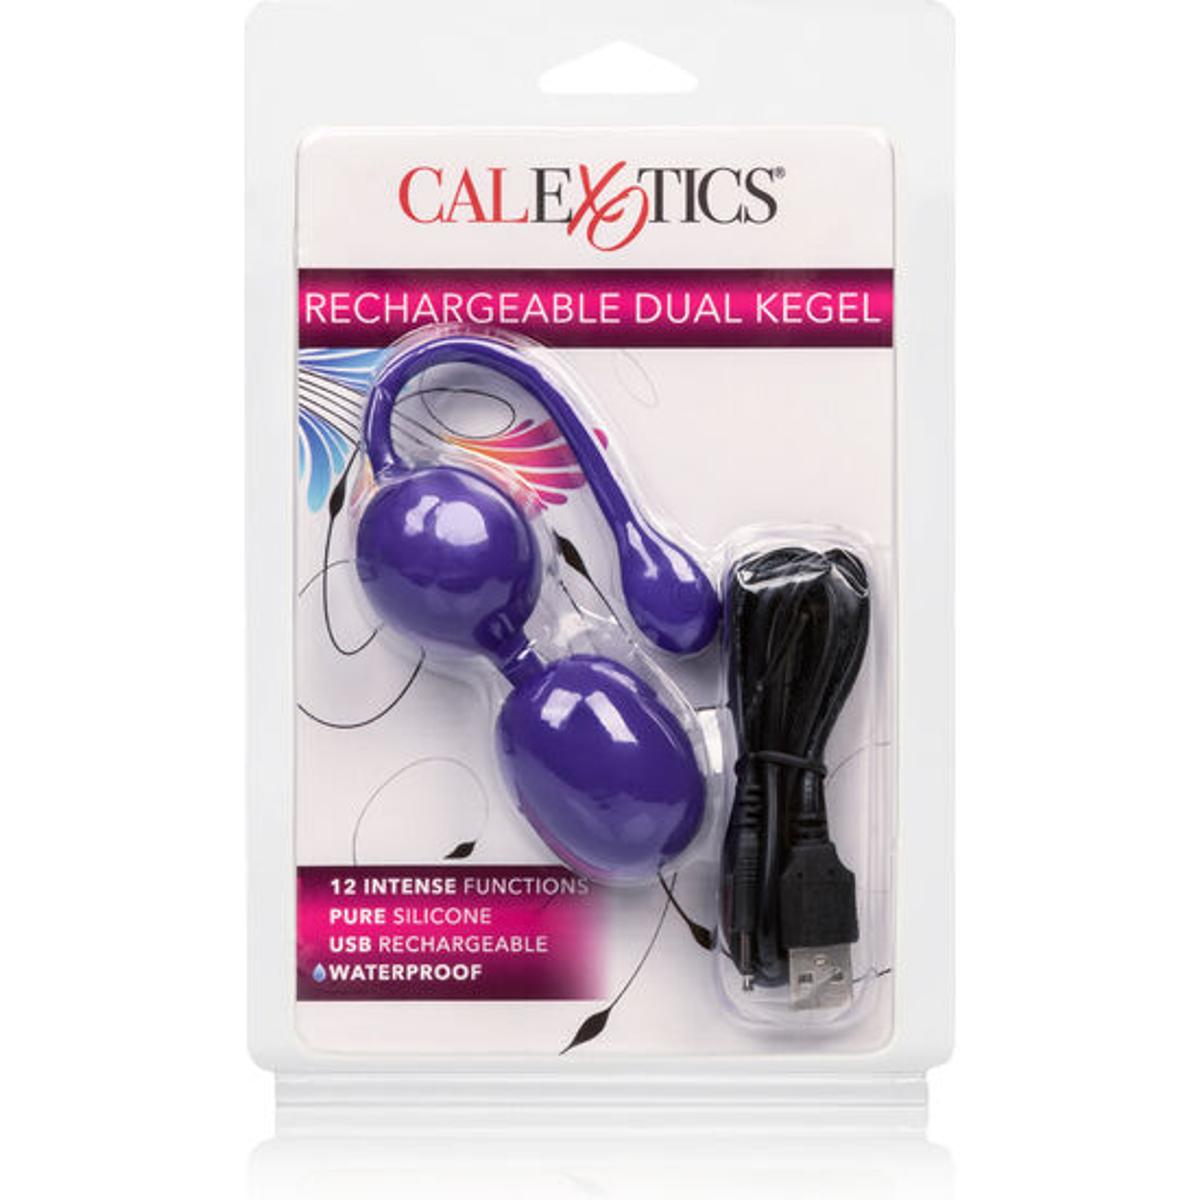 Rechargeable Dual Kegel - OH MY! FANTASY